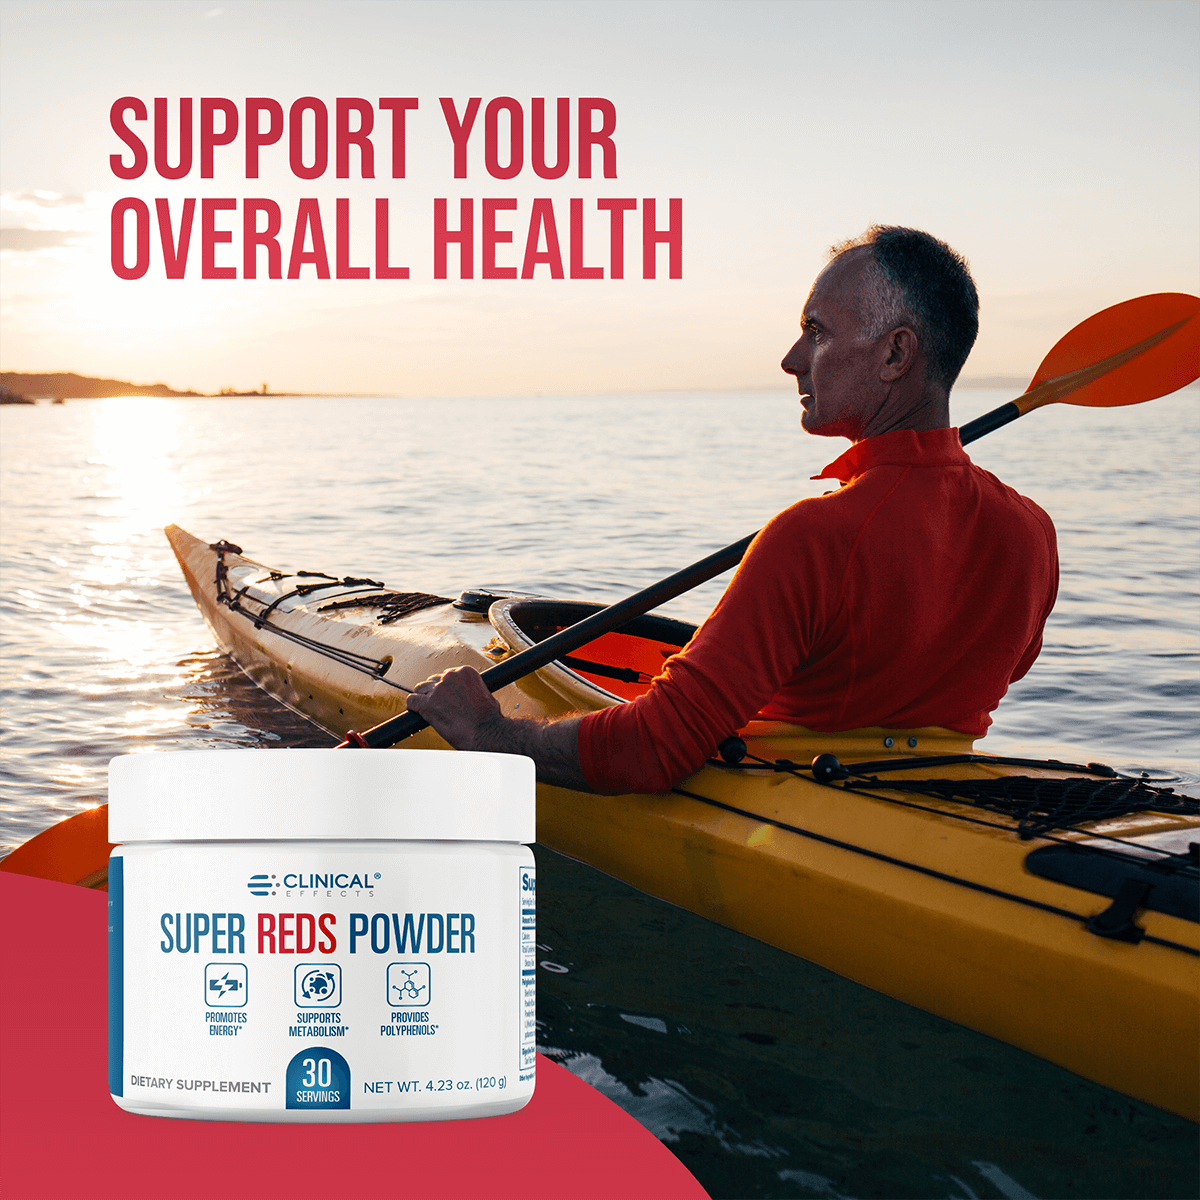 Support your overall health